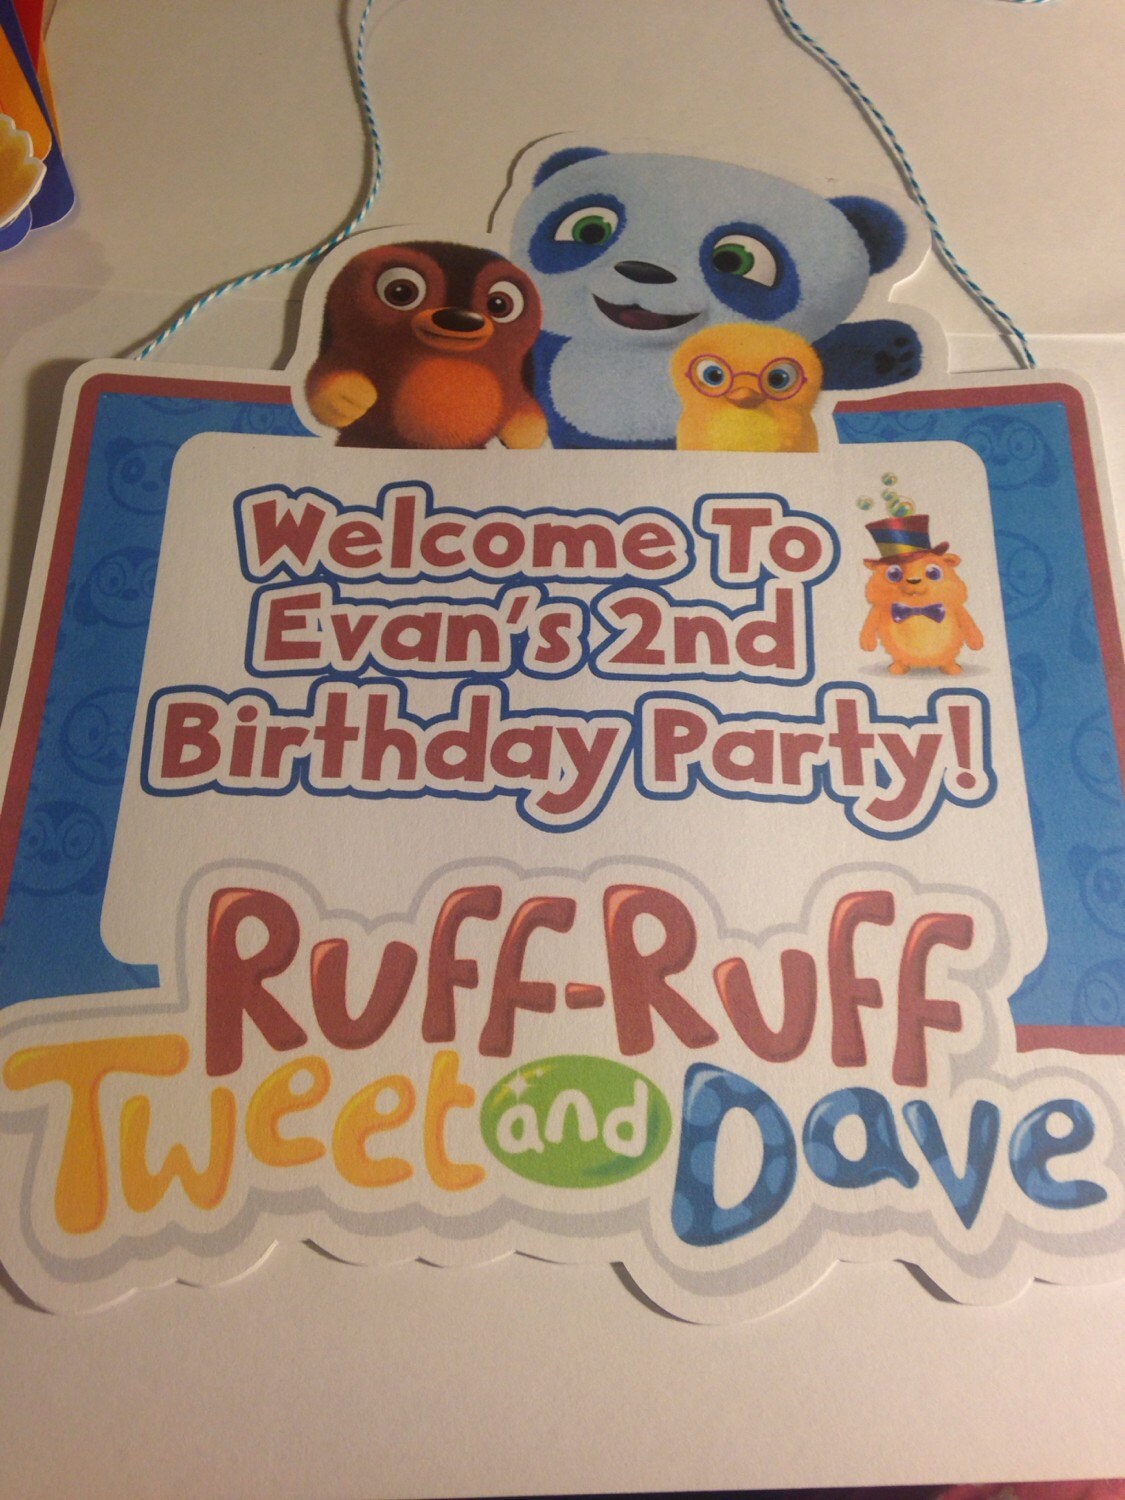 Ruff Ruff Tweet And Dave Party Pack